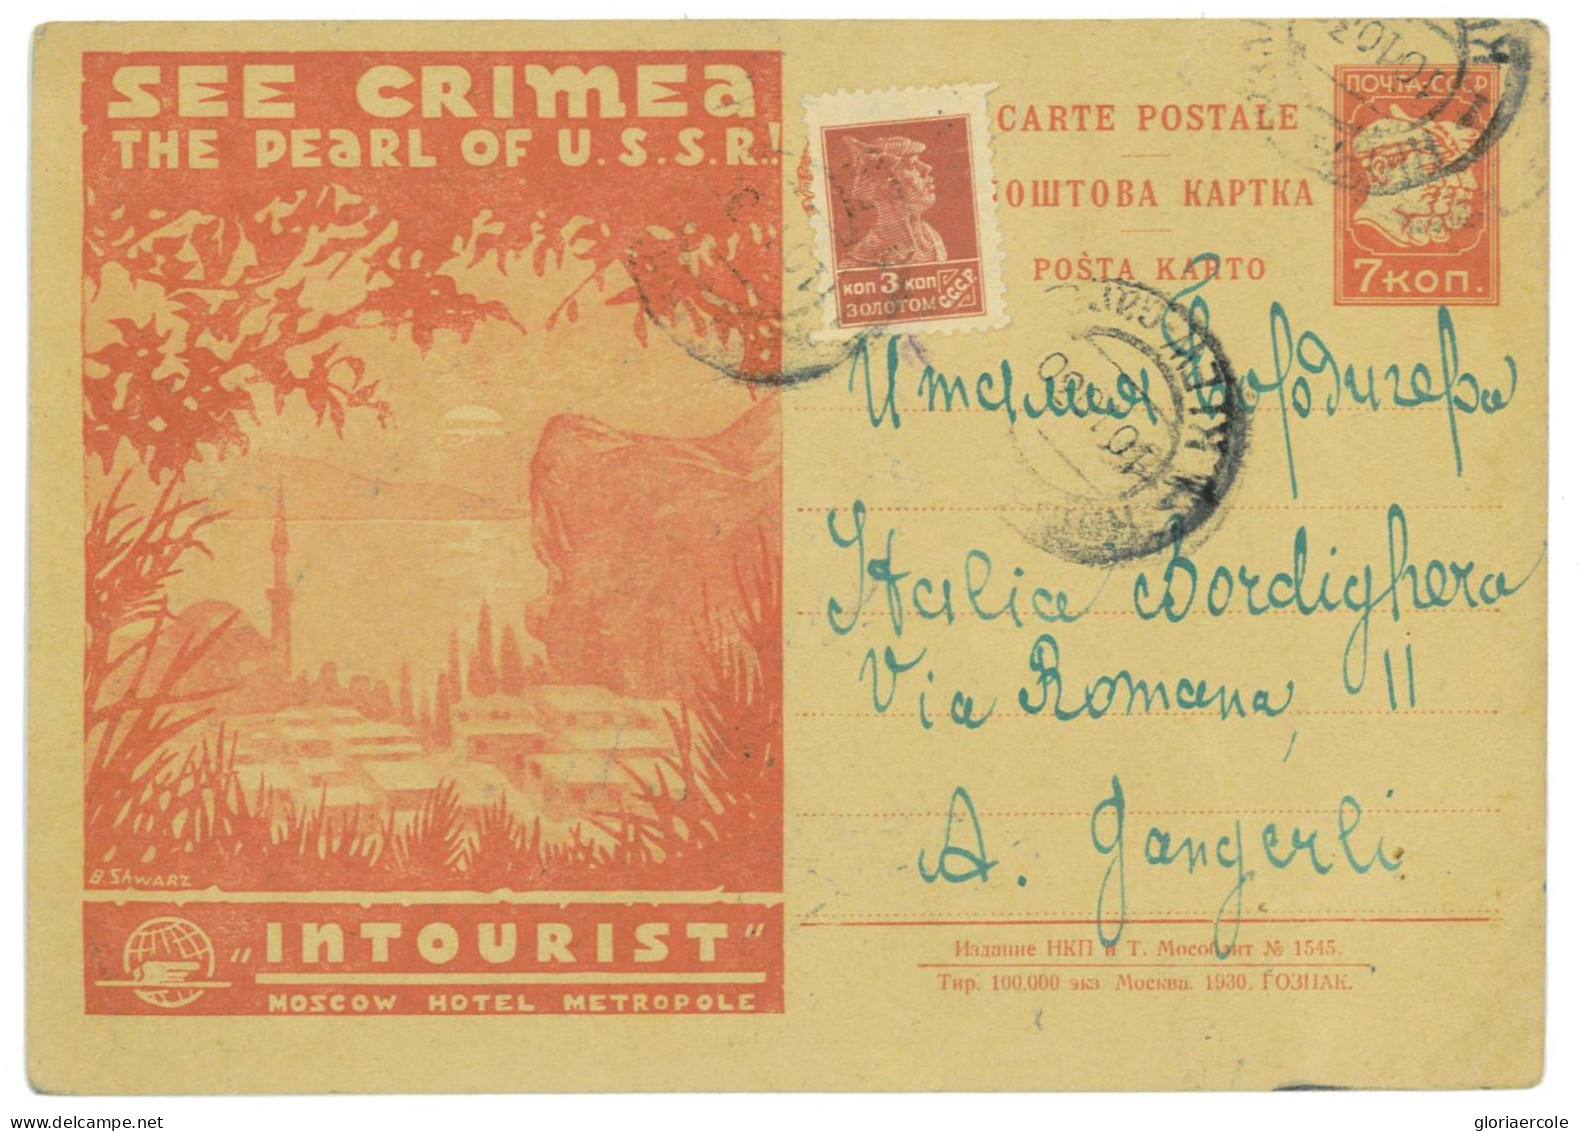 P2924 - RUSSIA POSTAL STATIONERY FRANKED WITH ADDITIONAL 3 KOPEK TO FORM A 10 KOPEK RATE TO ITALY, MICHEL P96/04 - Brieven En Documenten